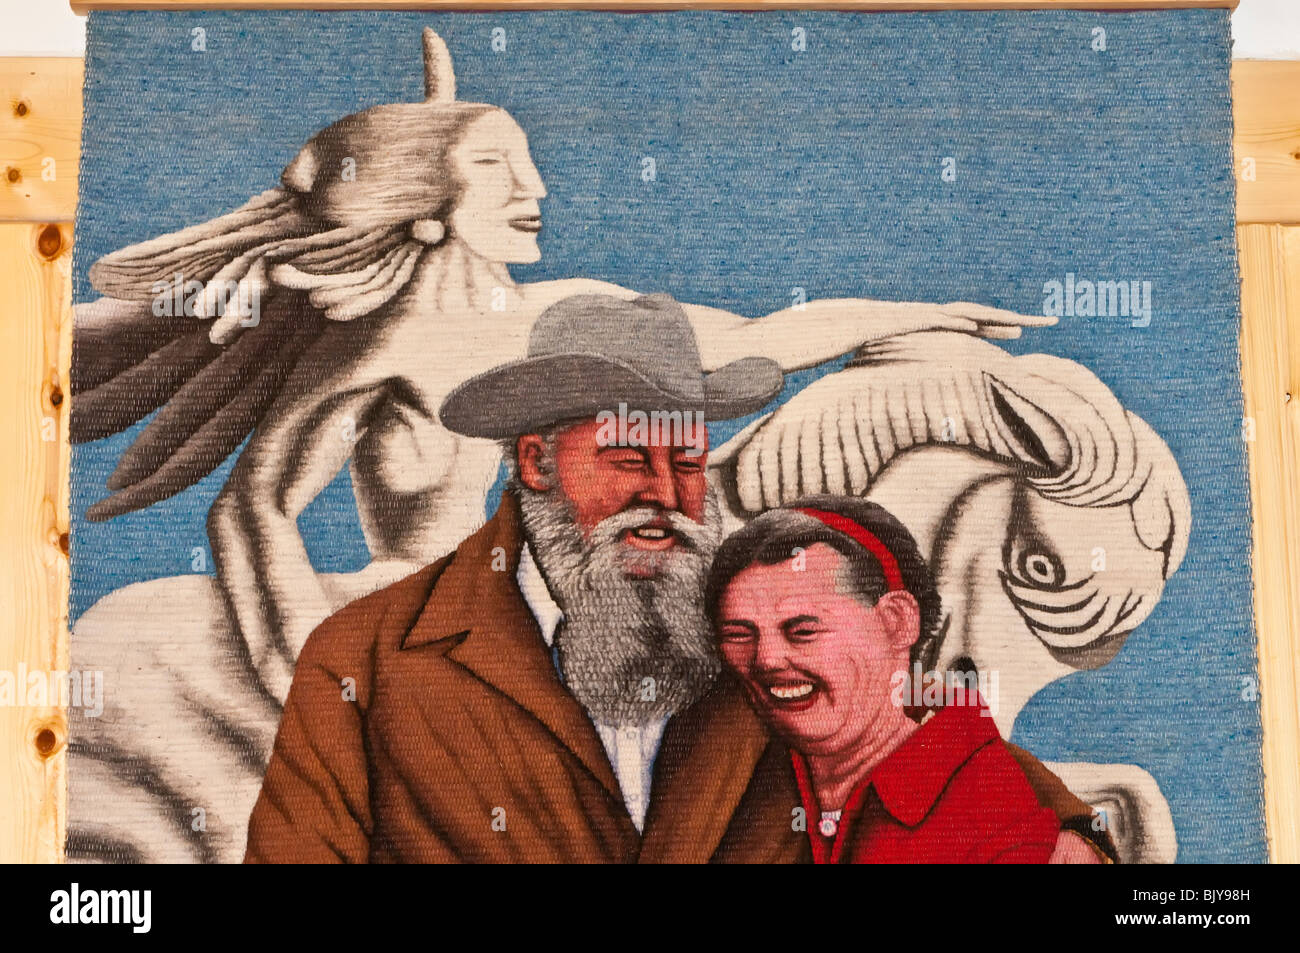 Tapestry of Korczak Ziolkowski and his wife, Ruth in front of a model of the Crazy Horse Memorial, South Dakota, USA Stock Photo